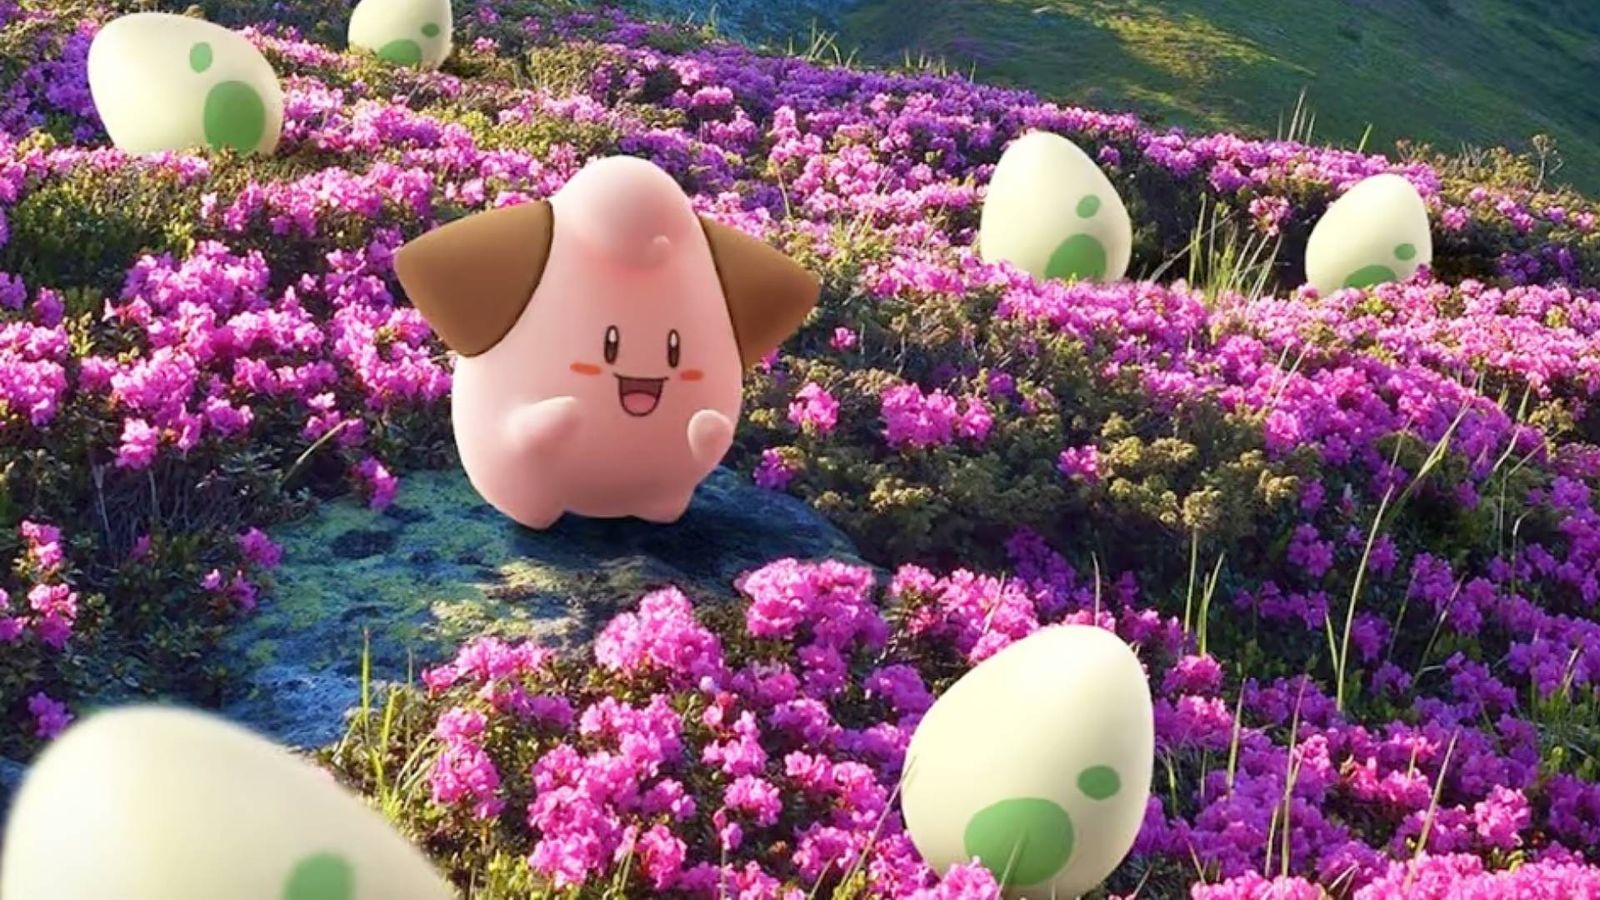 Cleffa surrounded by flowers and eggs